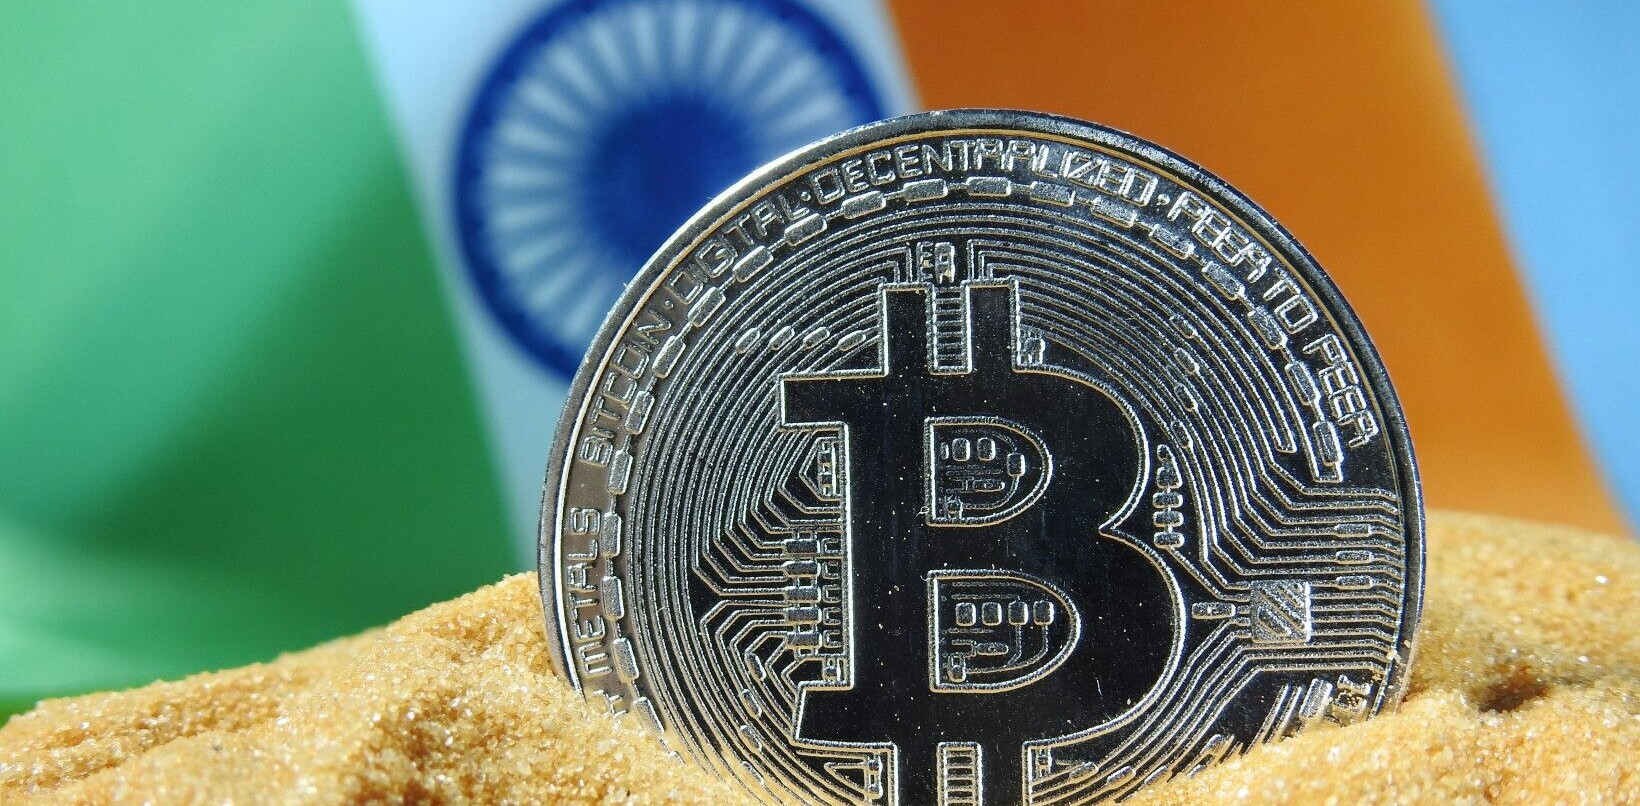 Kraken and Bitfinex are reportedly exploring ways to enter India